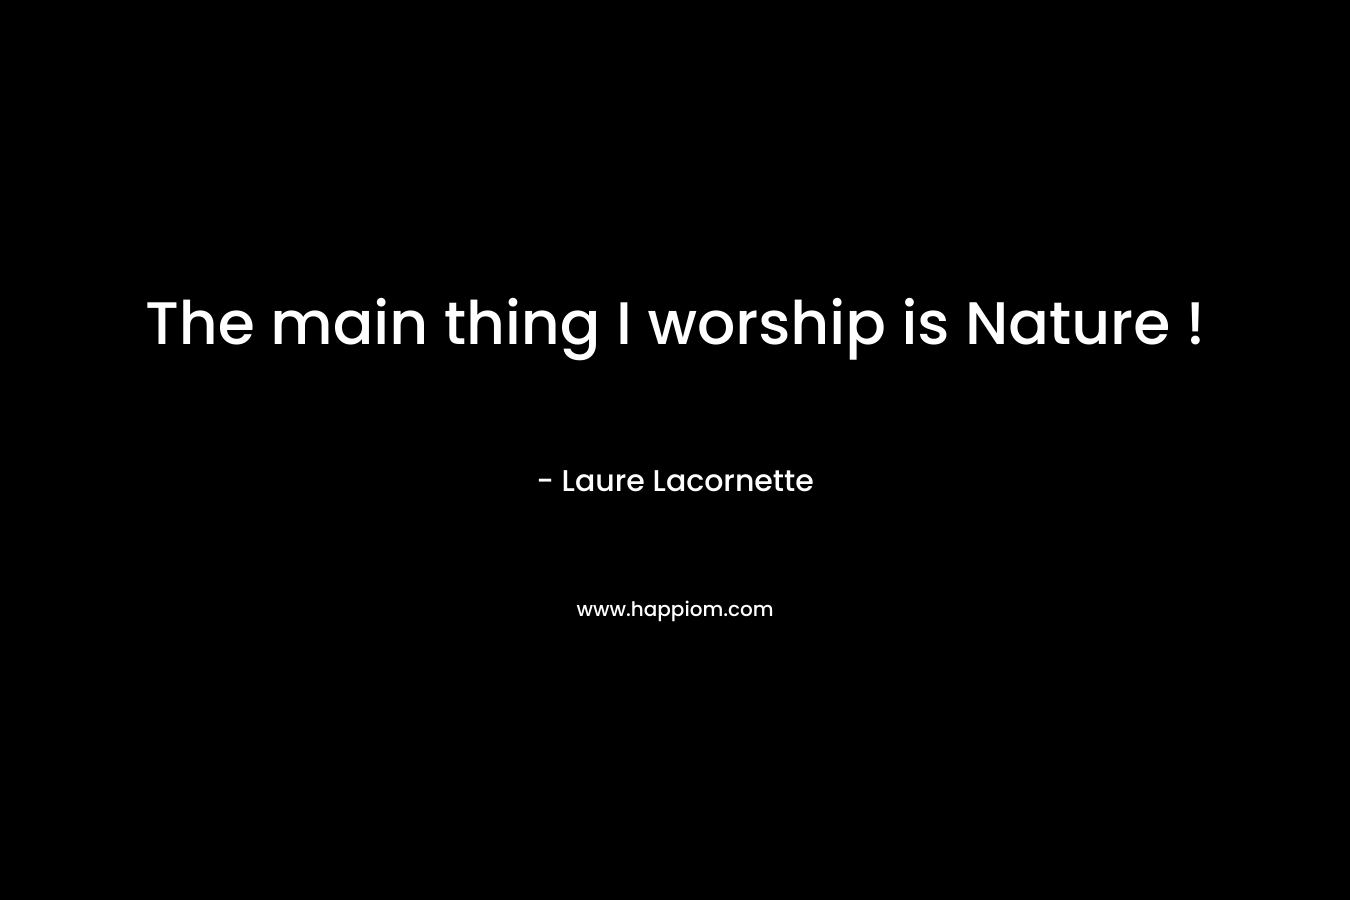 The main thing I worship is Nature !